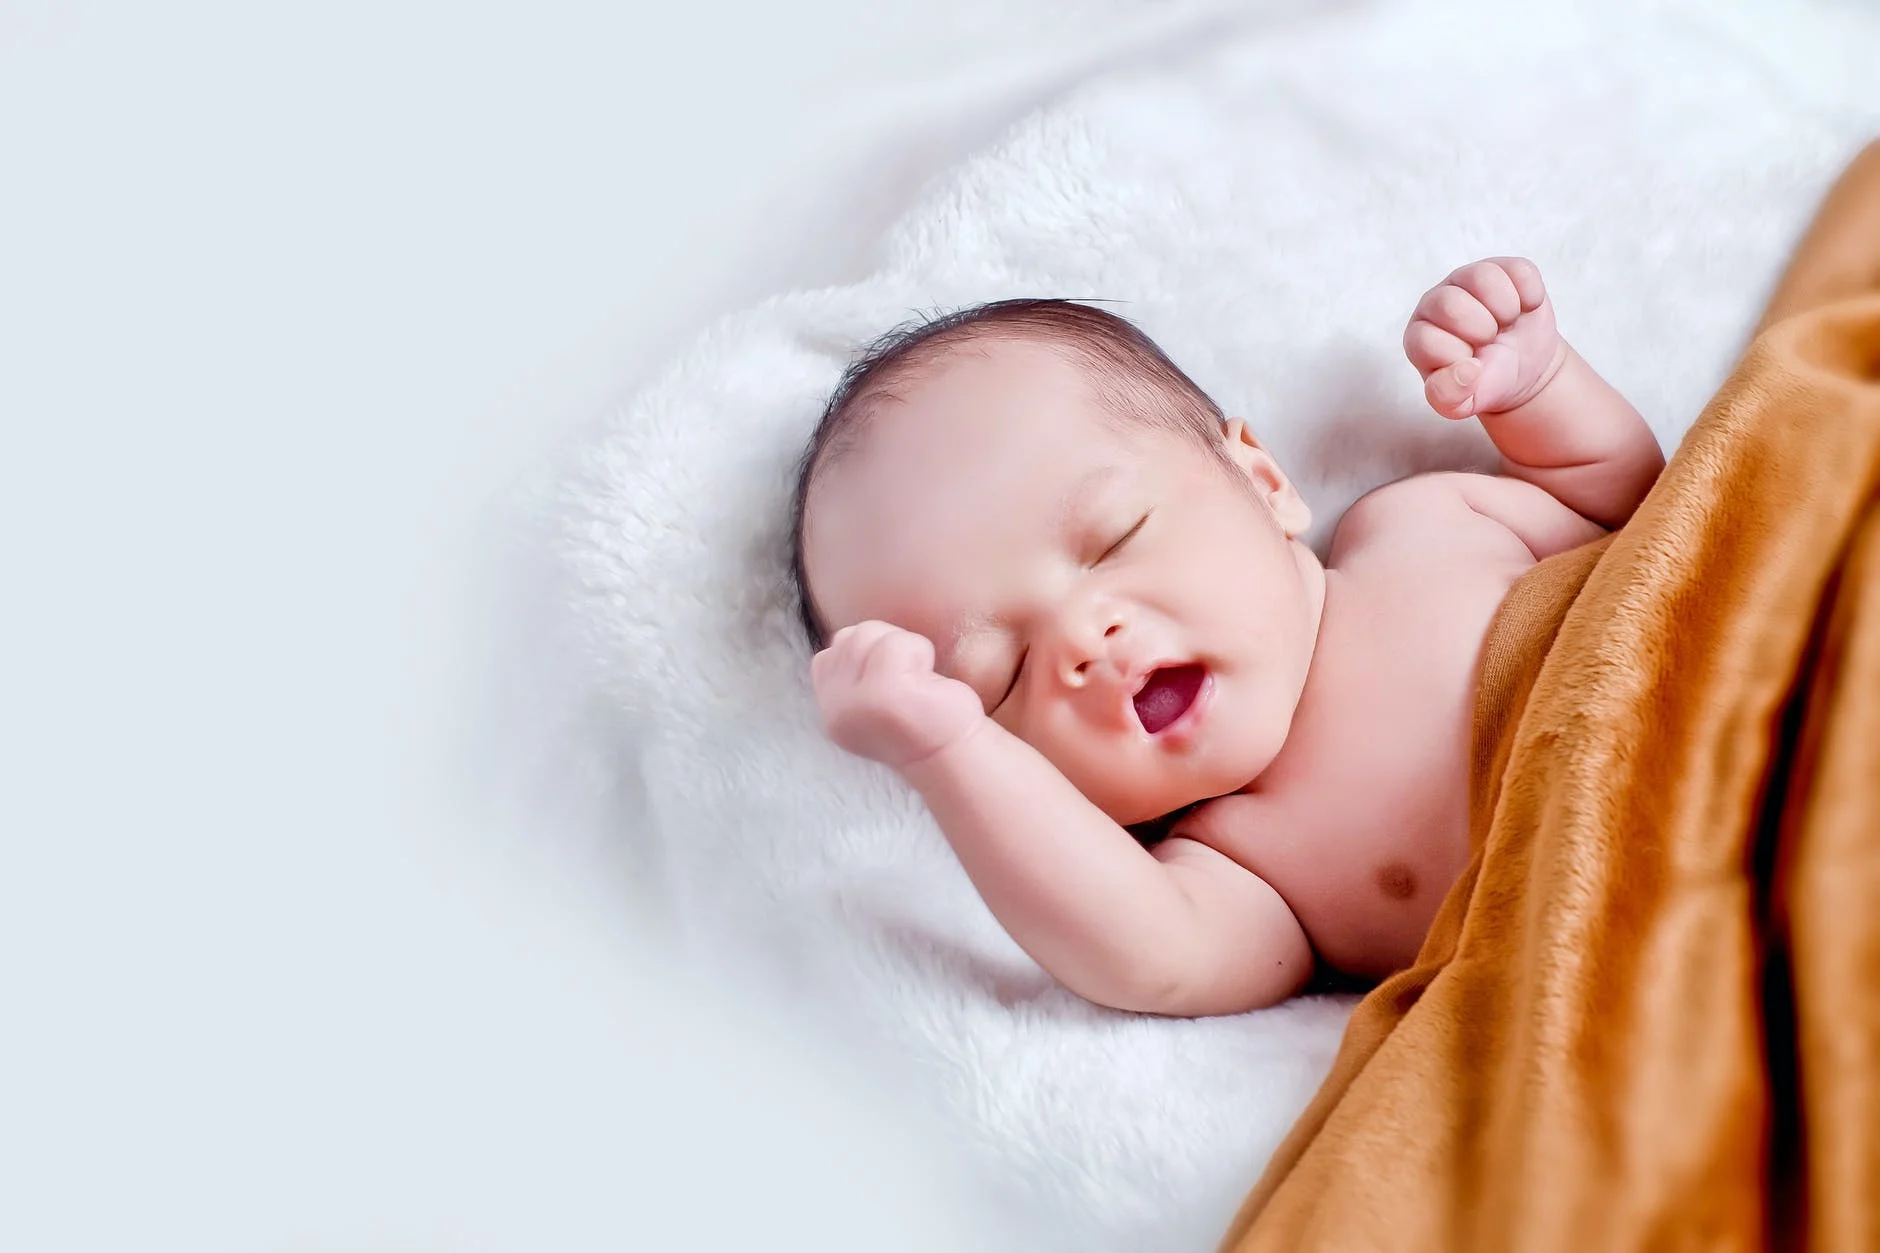 How does Circumcision Healing affect your baby’s health?